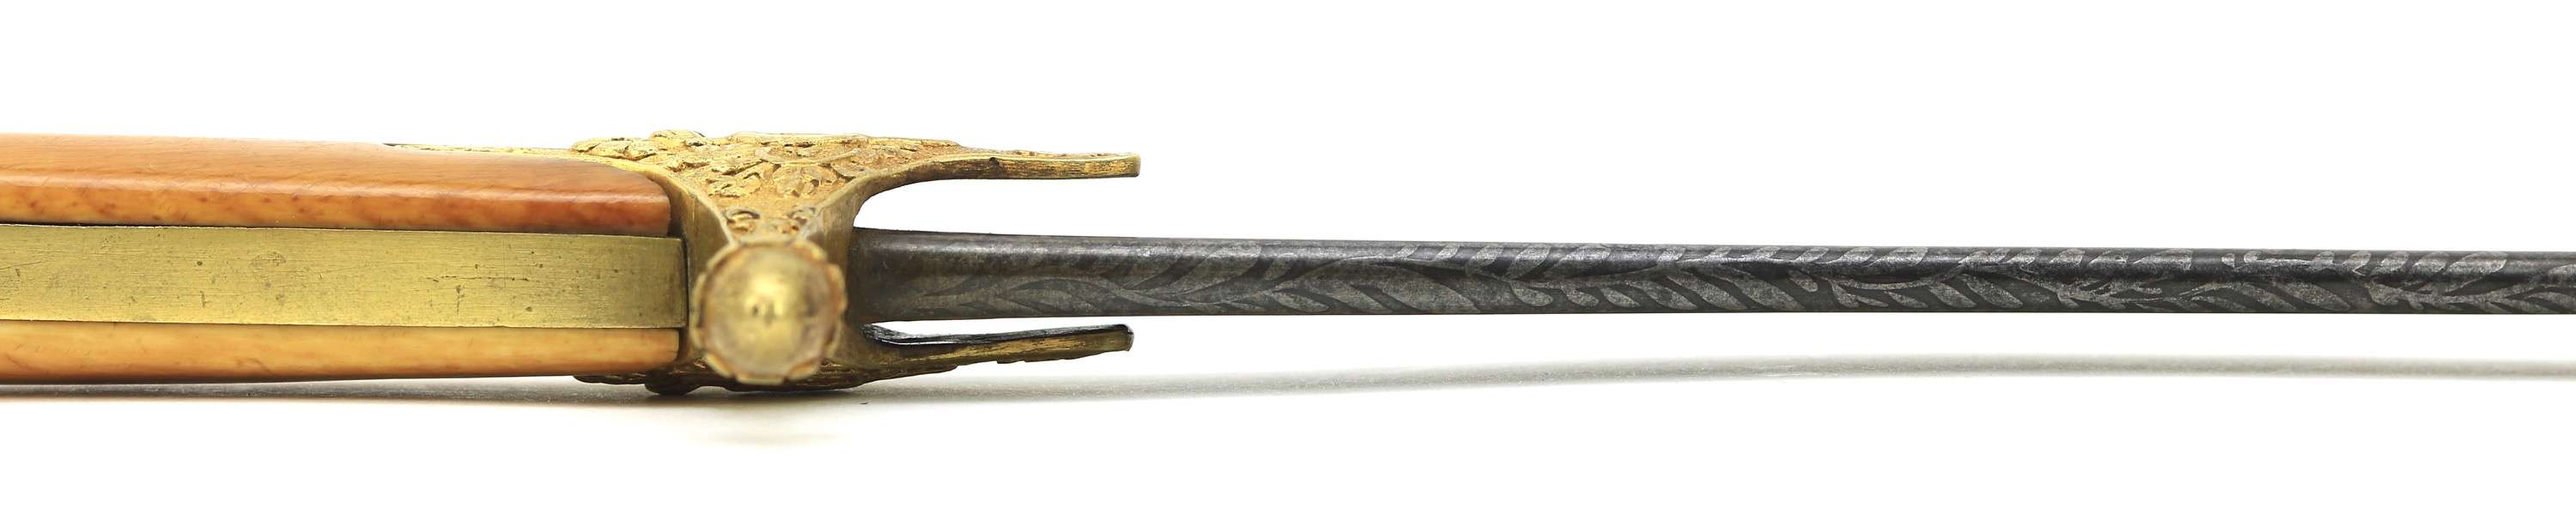 Siamese/French saber for King Mongkut the Great